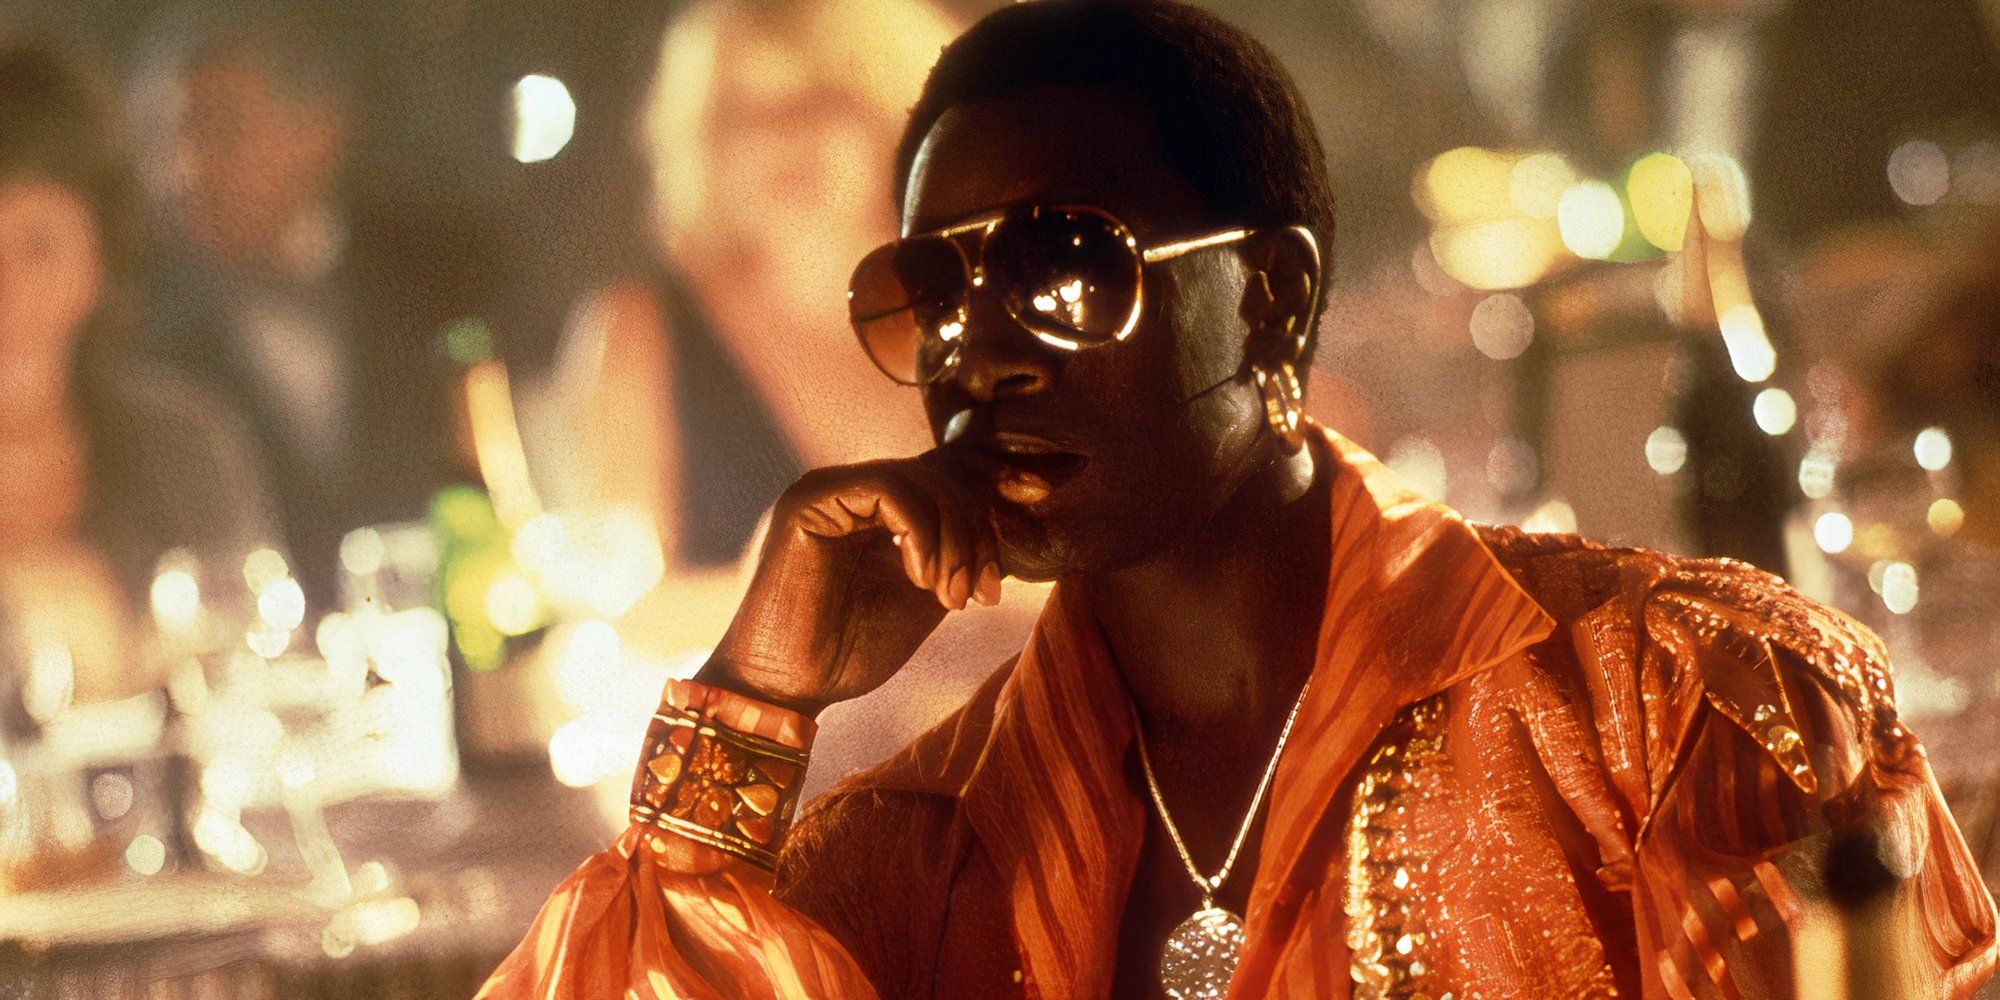 Don Cheadle as Buck Swoope in Boogie Nights looks pensive.